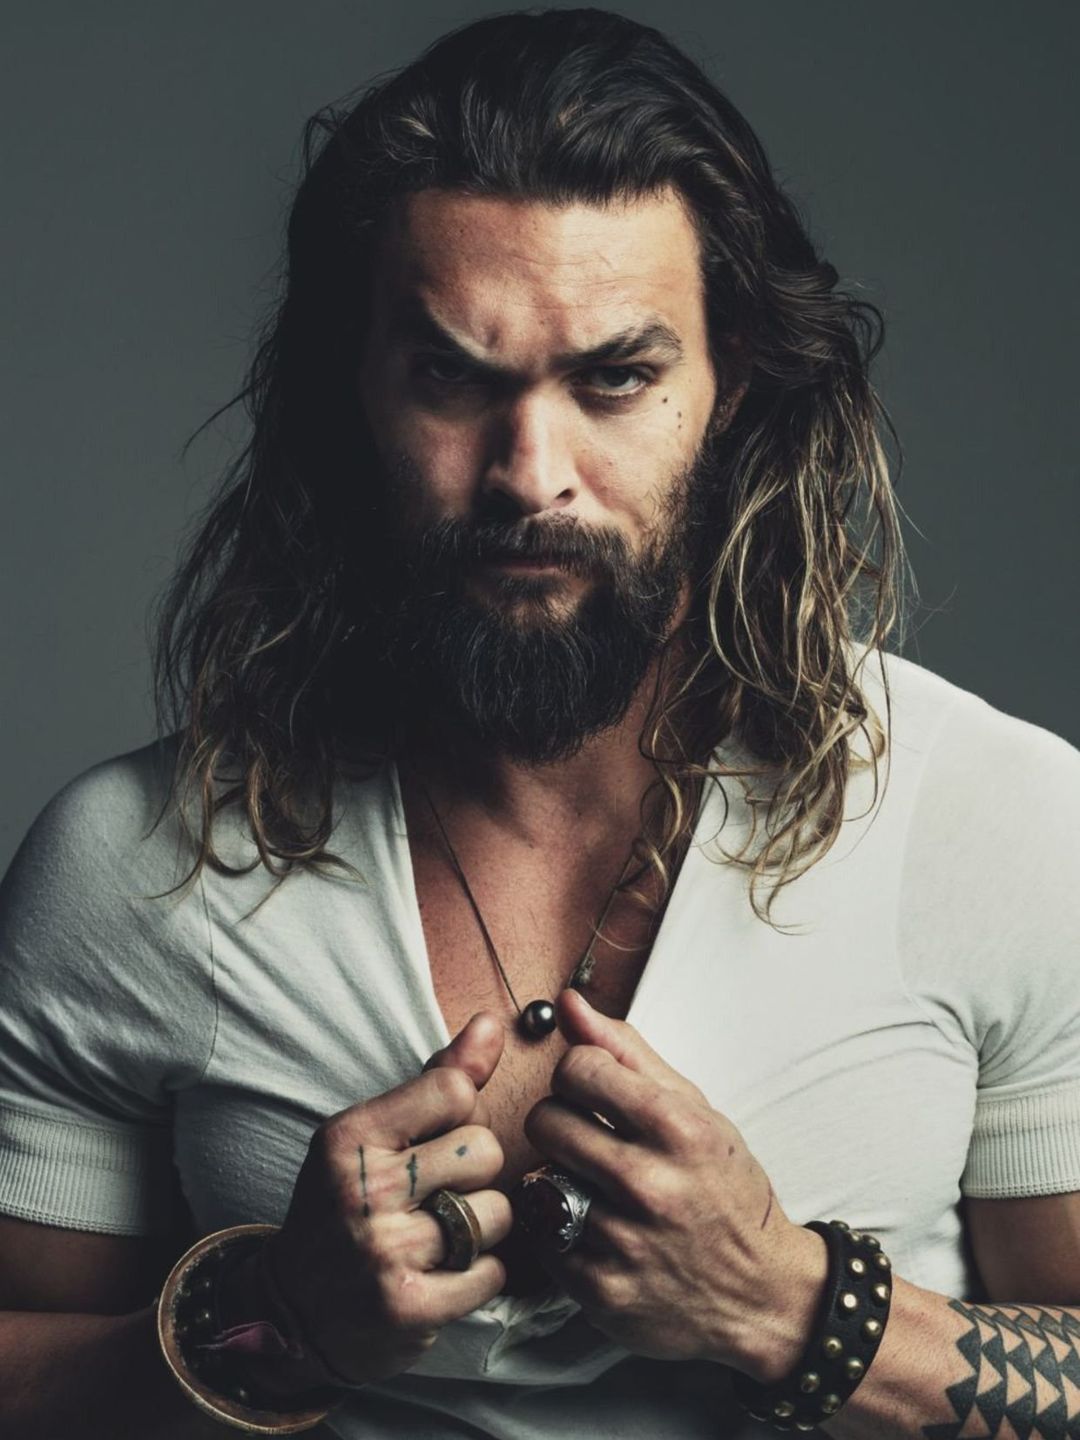 Jason Momoa how did he became famous